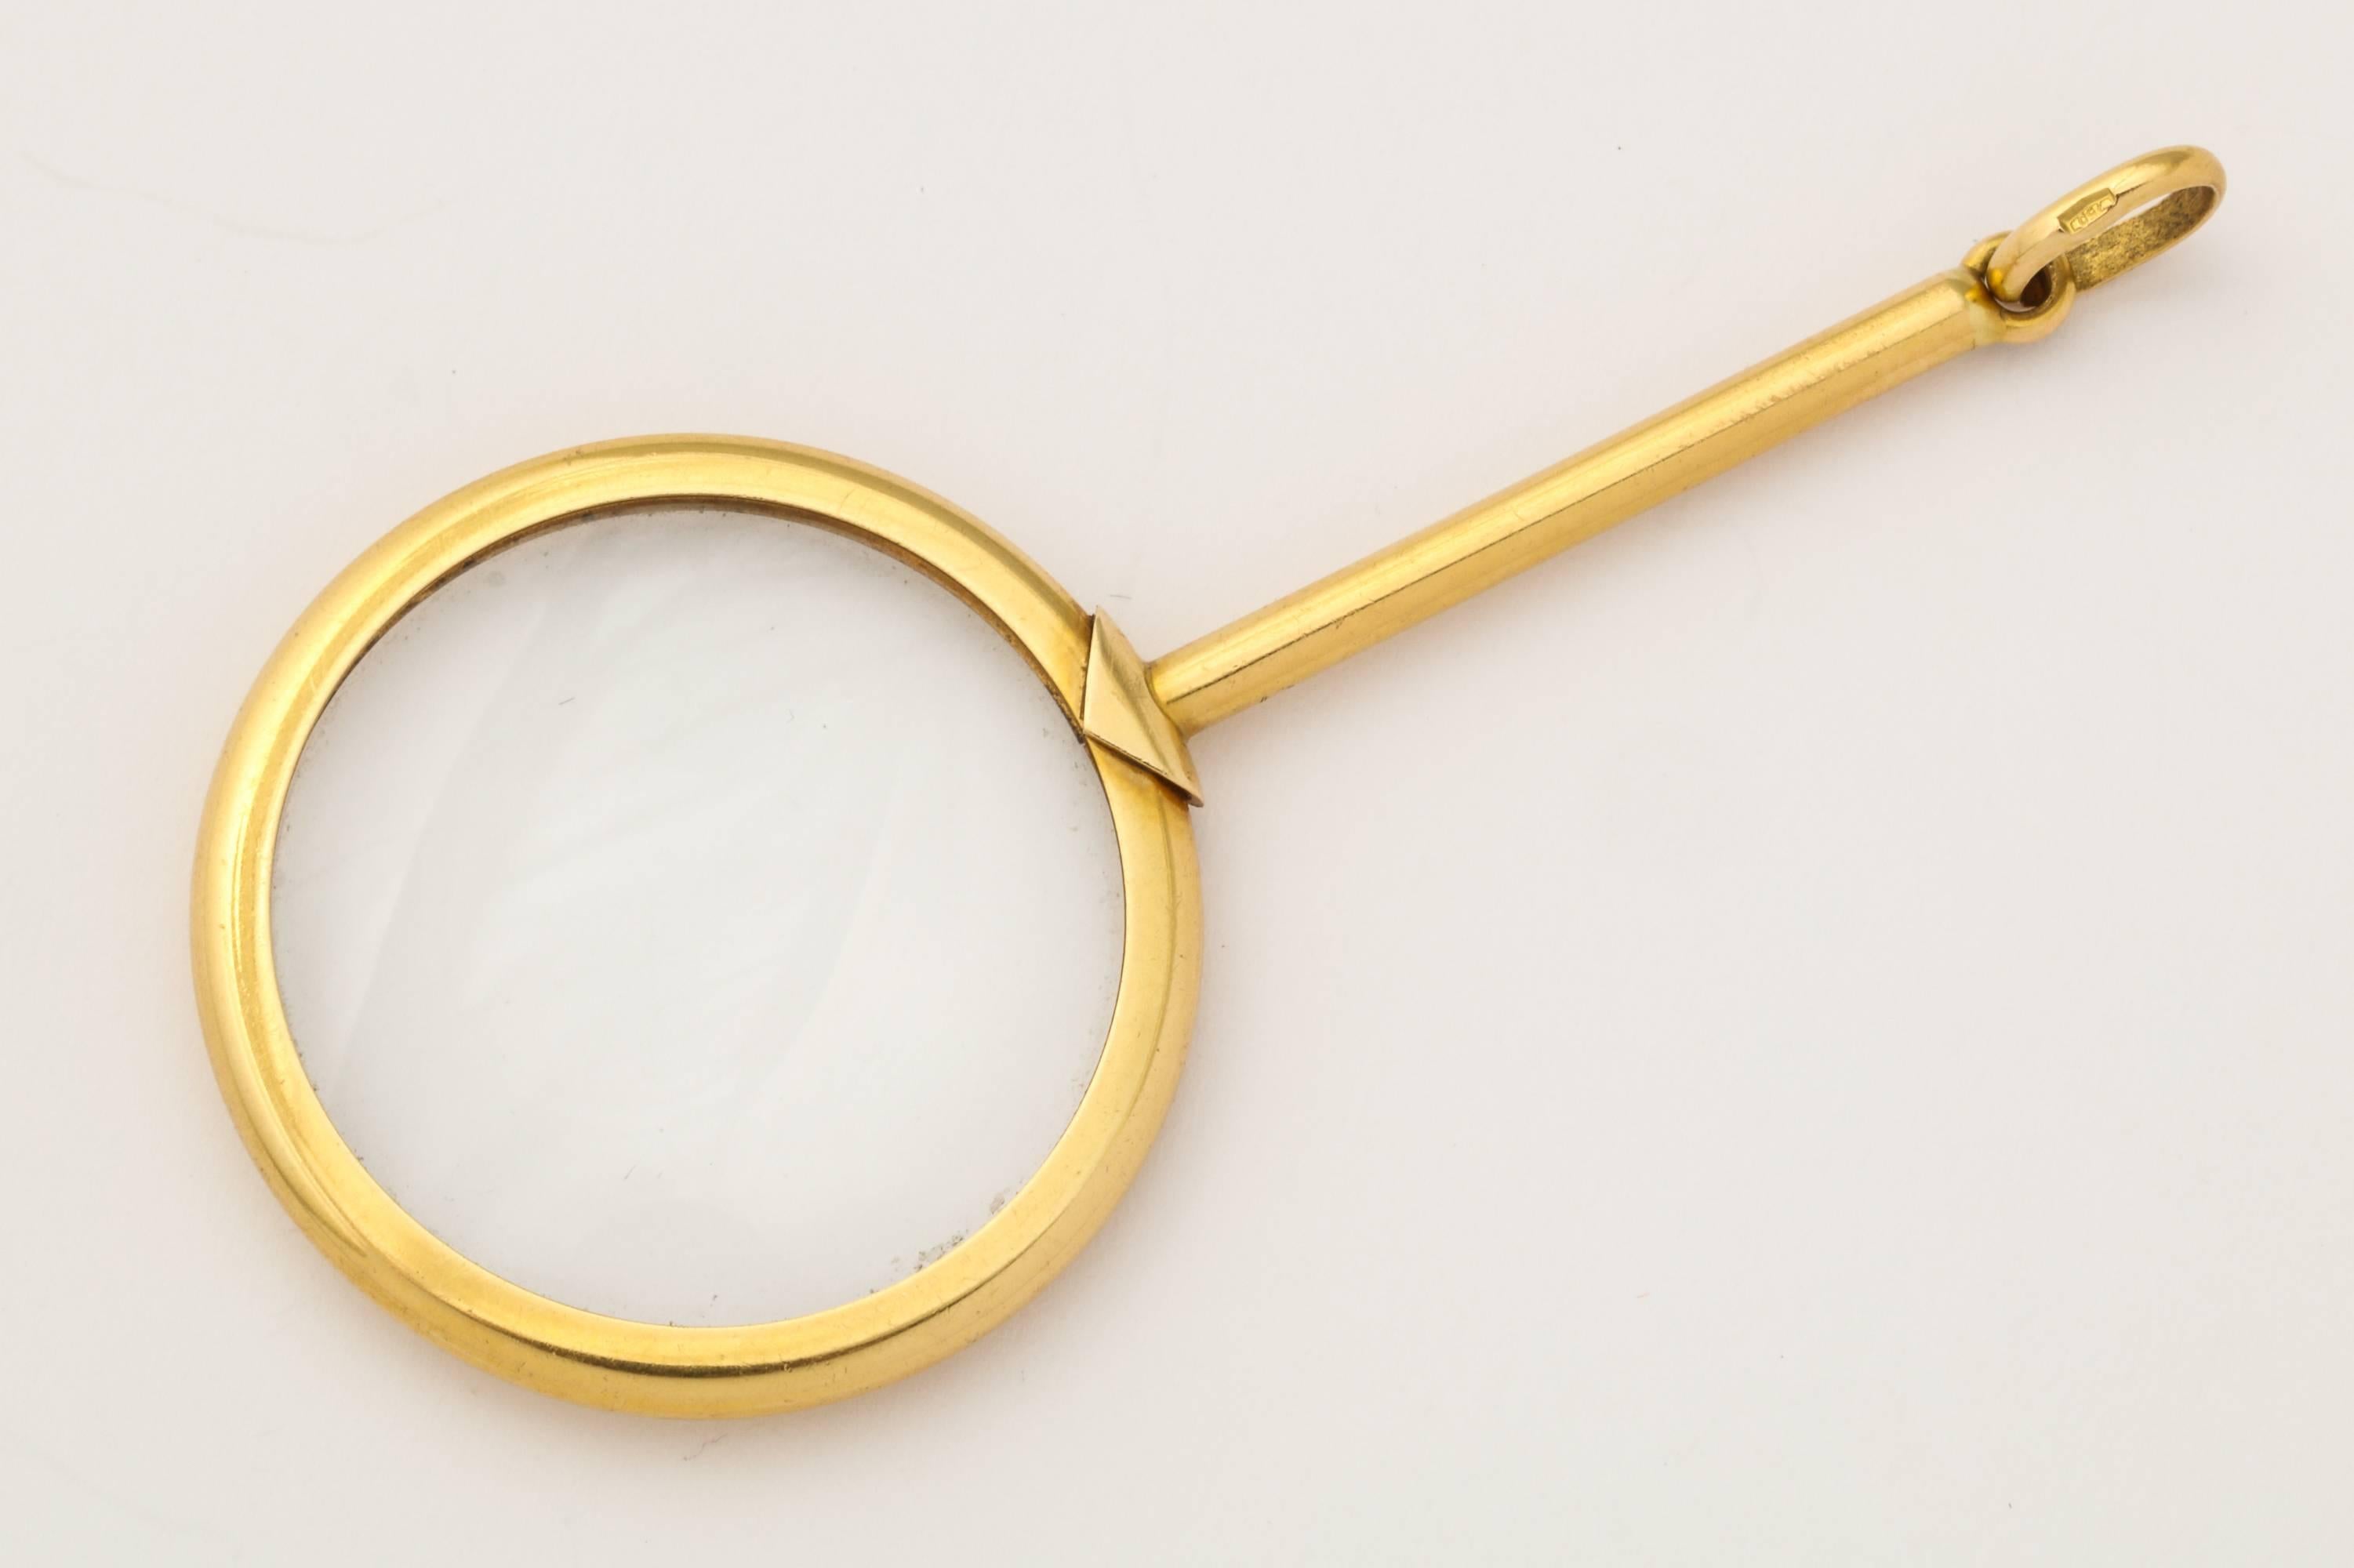 A simply elegant miniature magnifying glass in 18K gold, from a 1910s man's watch fob, but now also for a lady's chain. Italian gold marks. 2 5/8 inches long.